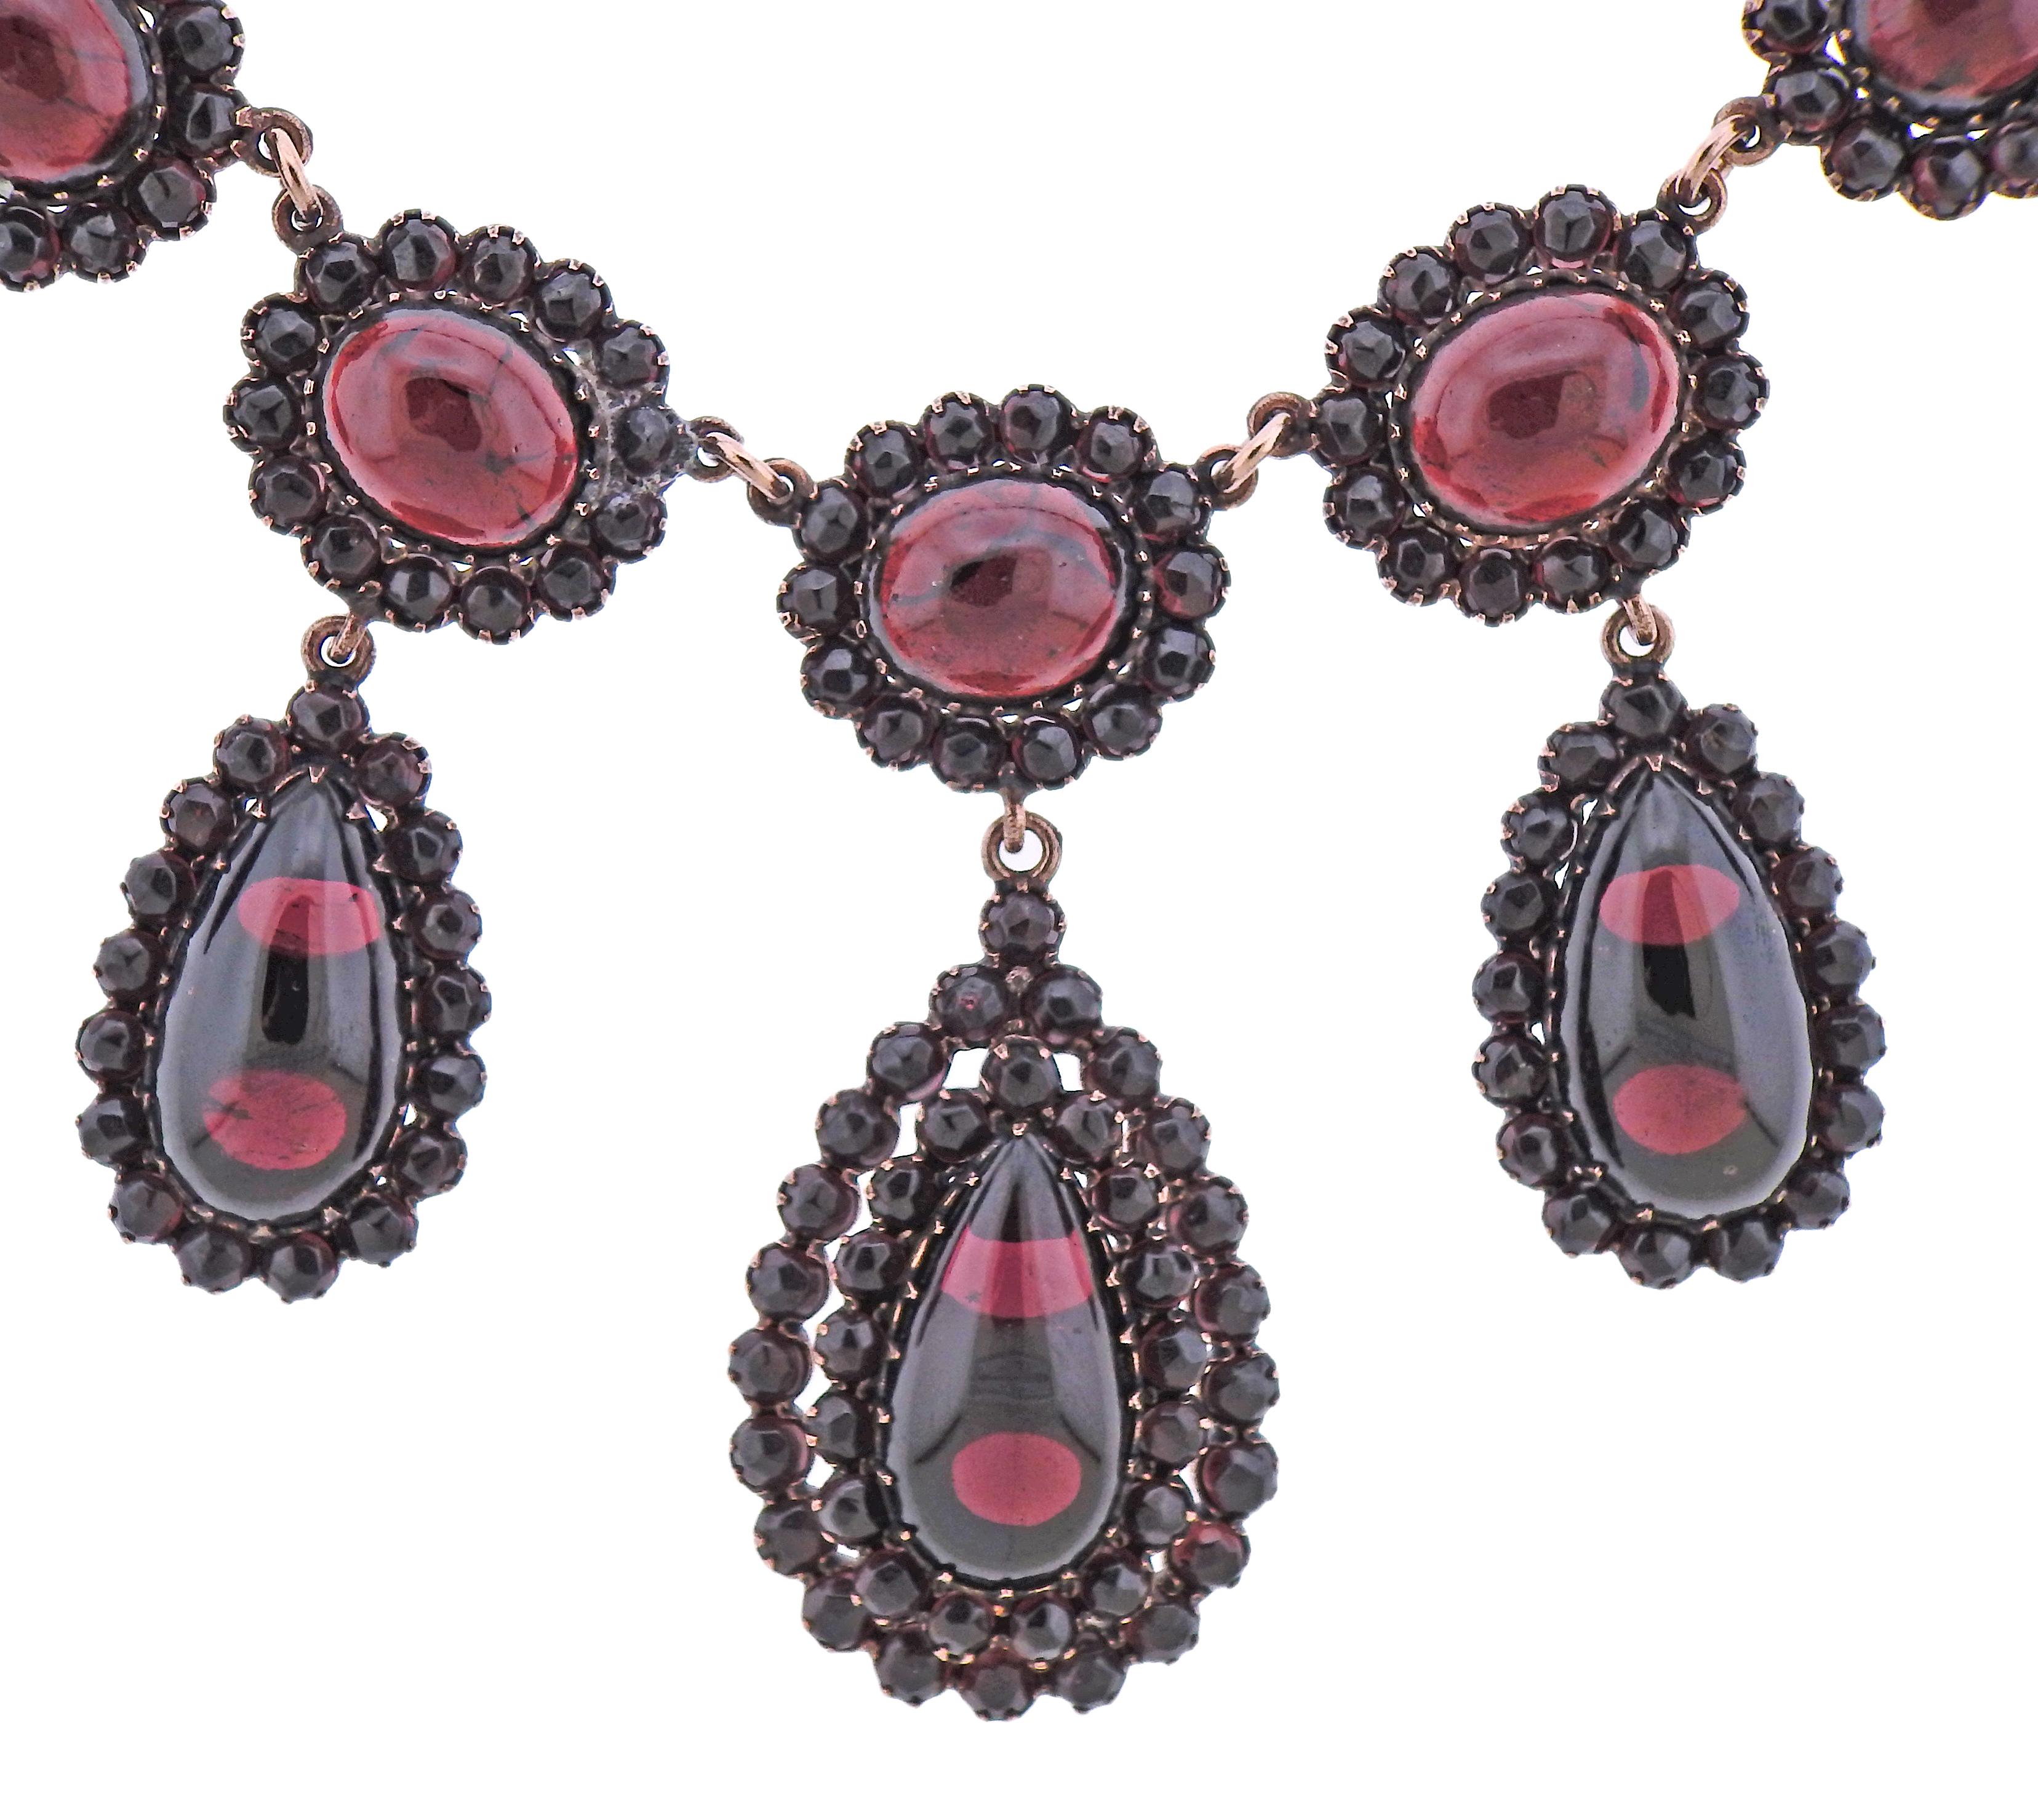 Antique base metal rose tone necklace with Bohemian garnets (multiple stones are chipped). Necklace is 16.5